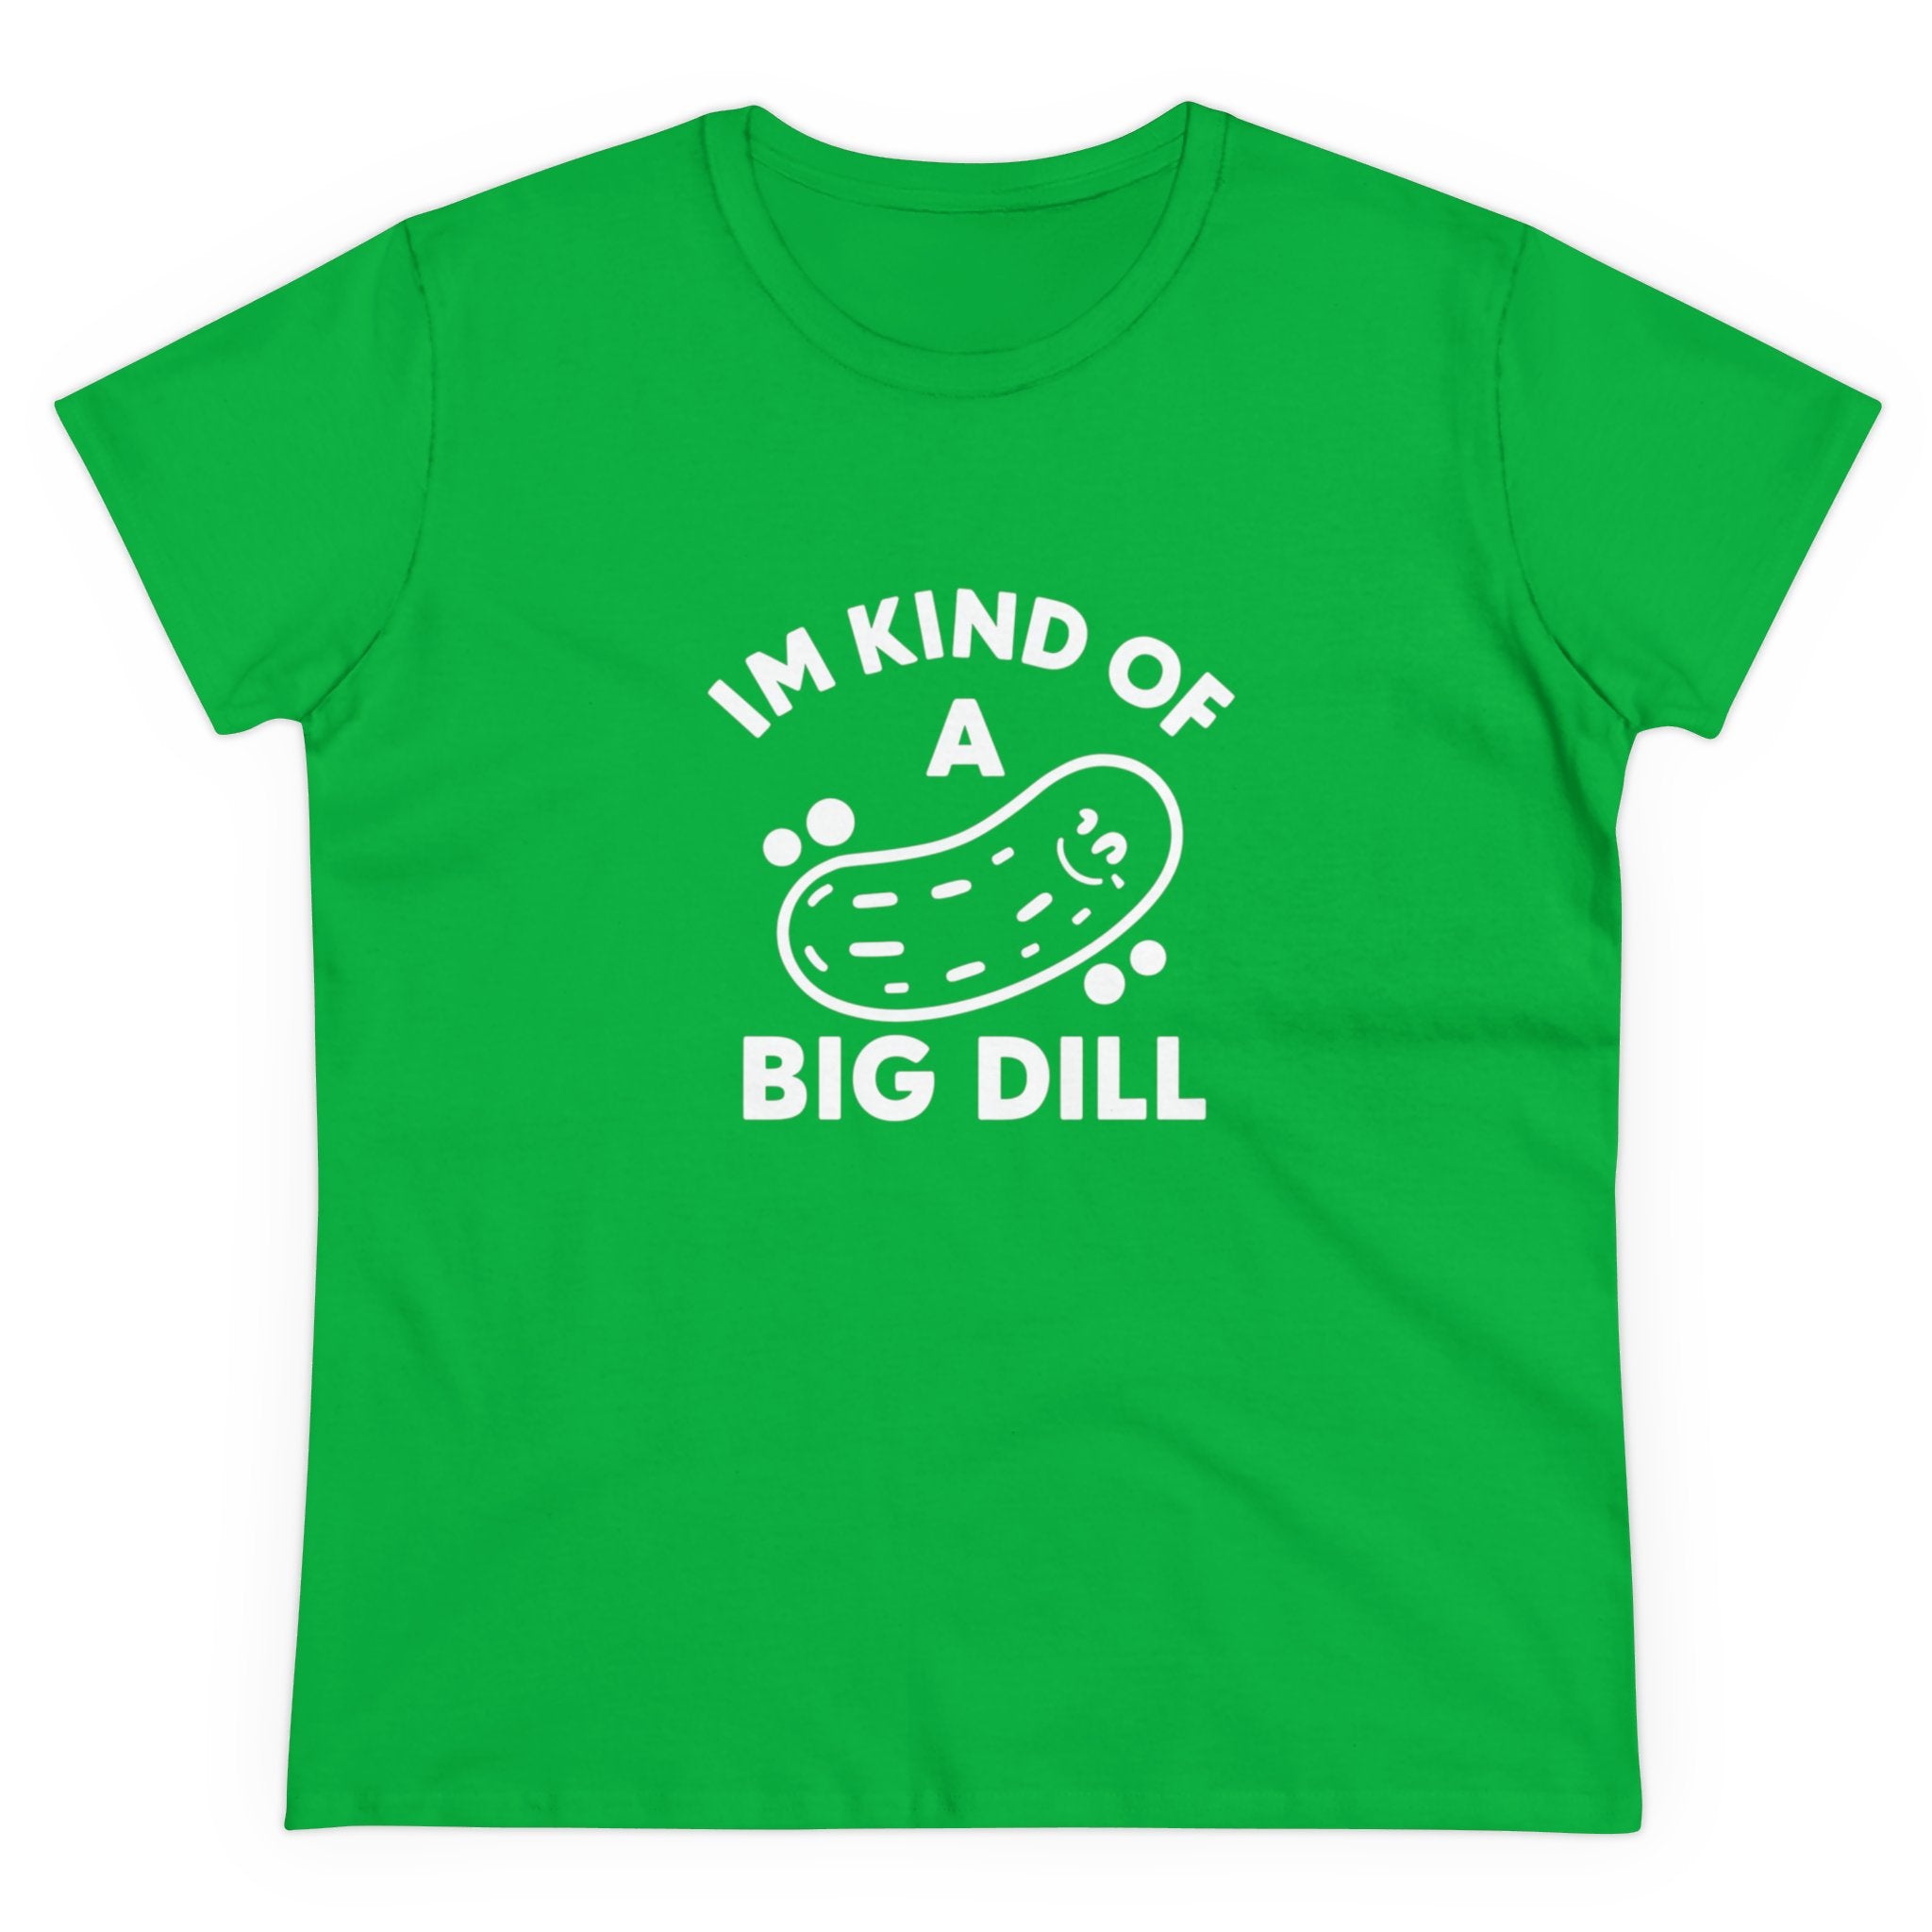 Replacing the product in the sentence as requested, here is the revised version:

A I'M KIND OF A BIG DILL - Women's Tee featuring a whimsical white graphic of a pickle and the playful text "I'M KIND OF A BIG DILL.